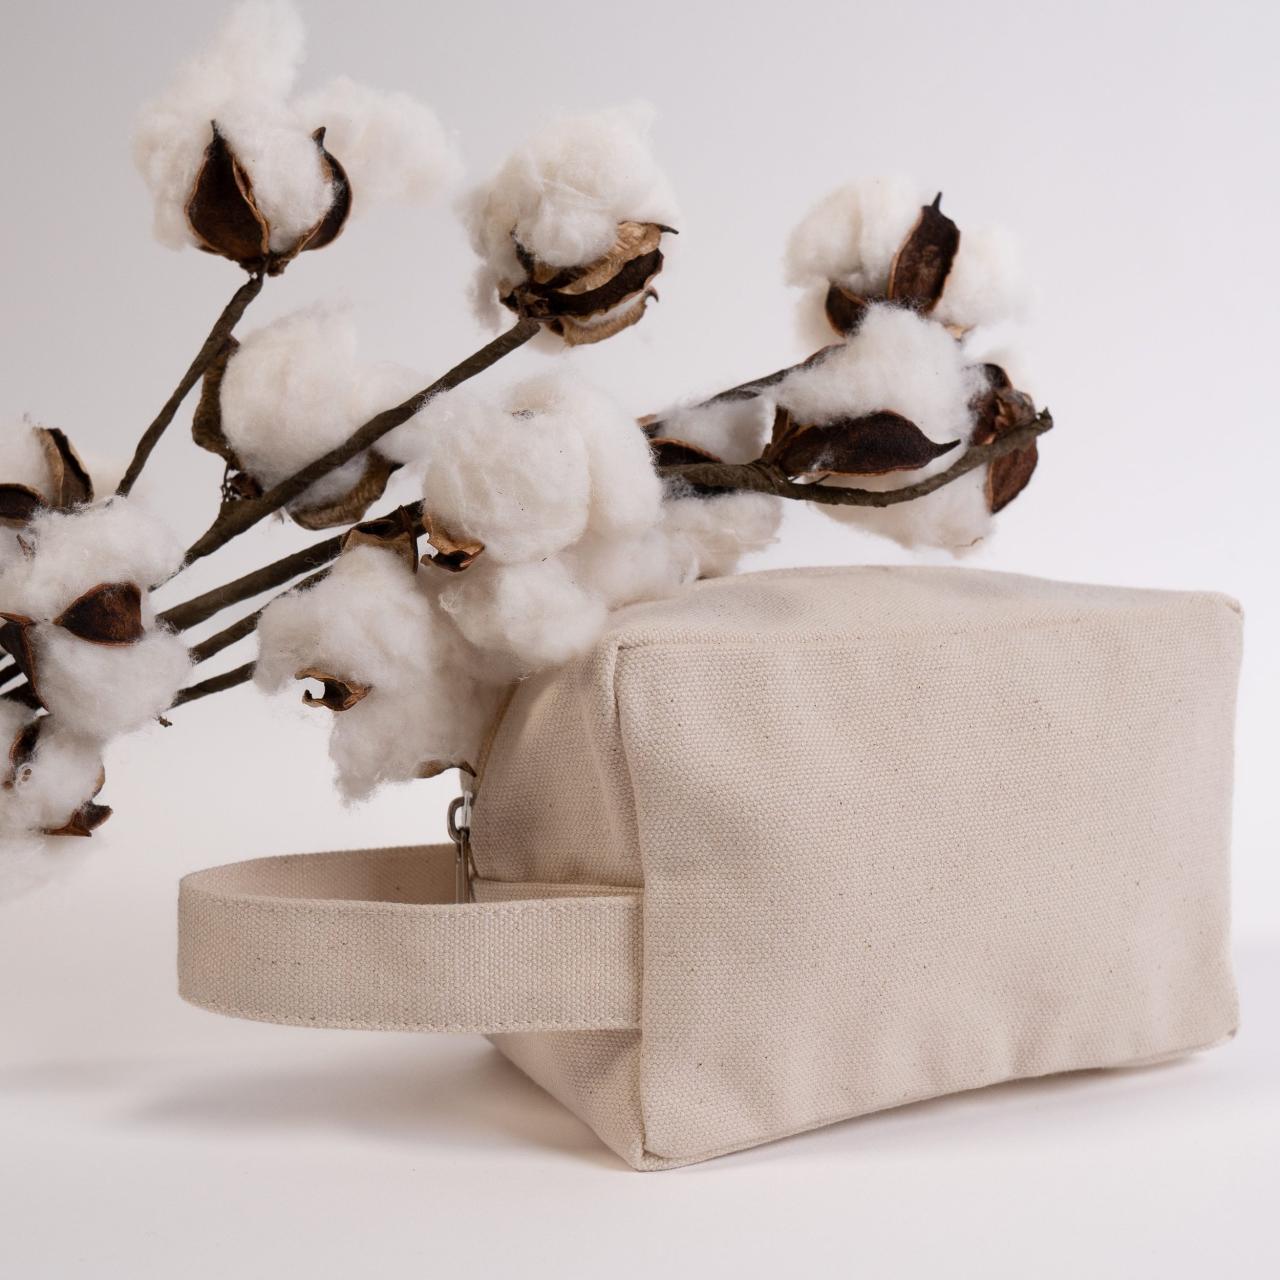 Cotton Cosmetic Bags: Eco-Friendly and Chic!